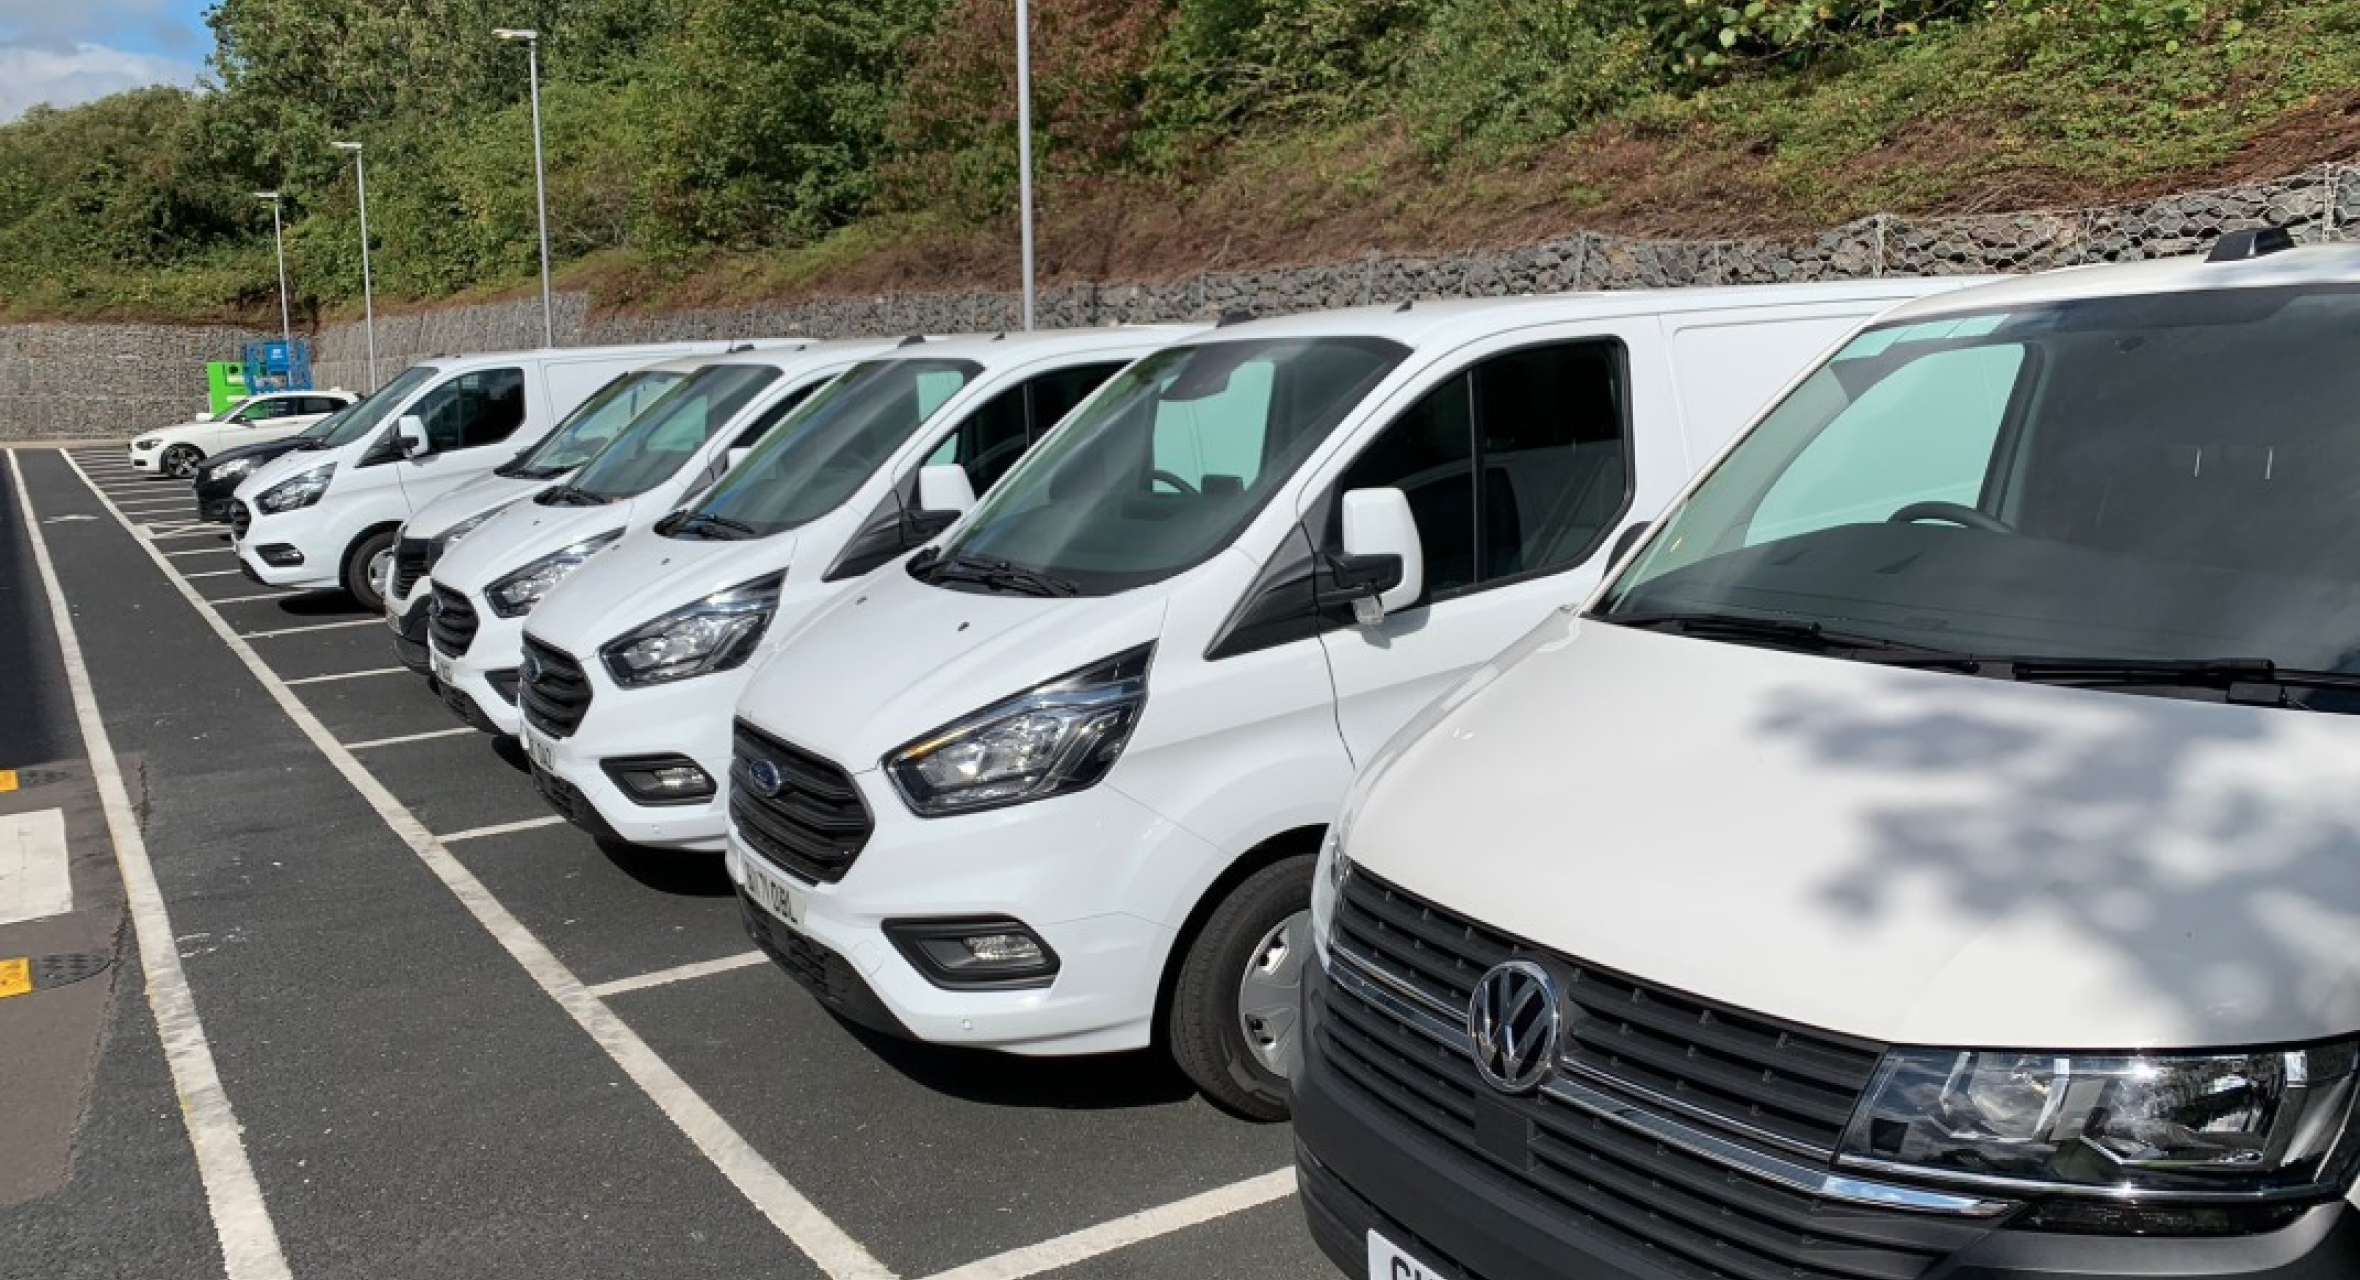 Logistics company uses ABAX telematics to keep track of couriers and vans